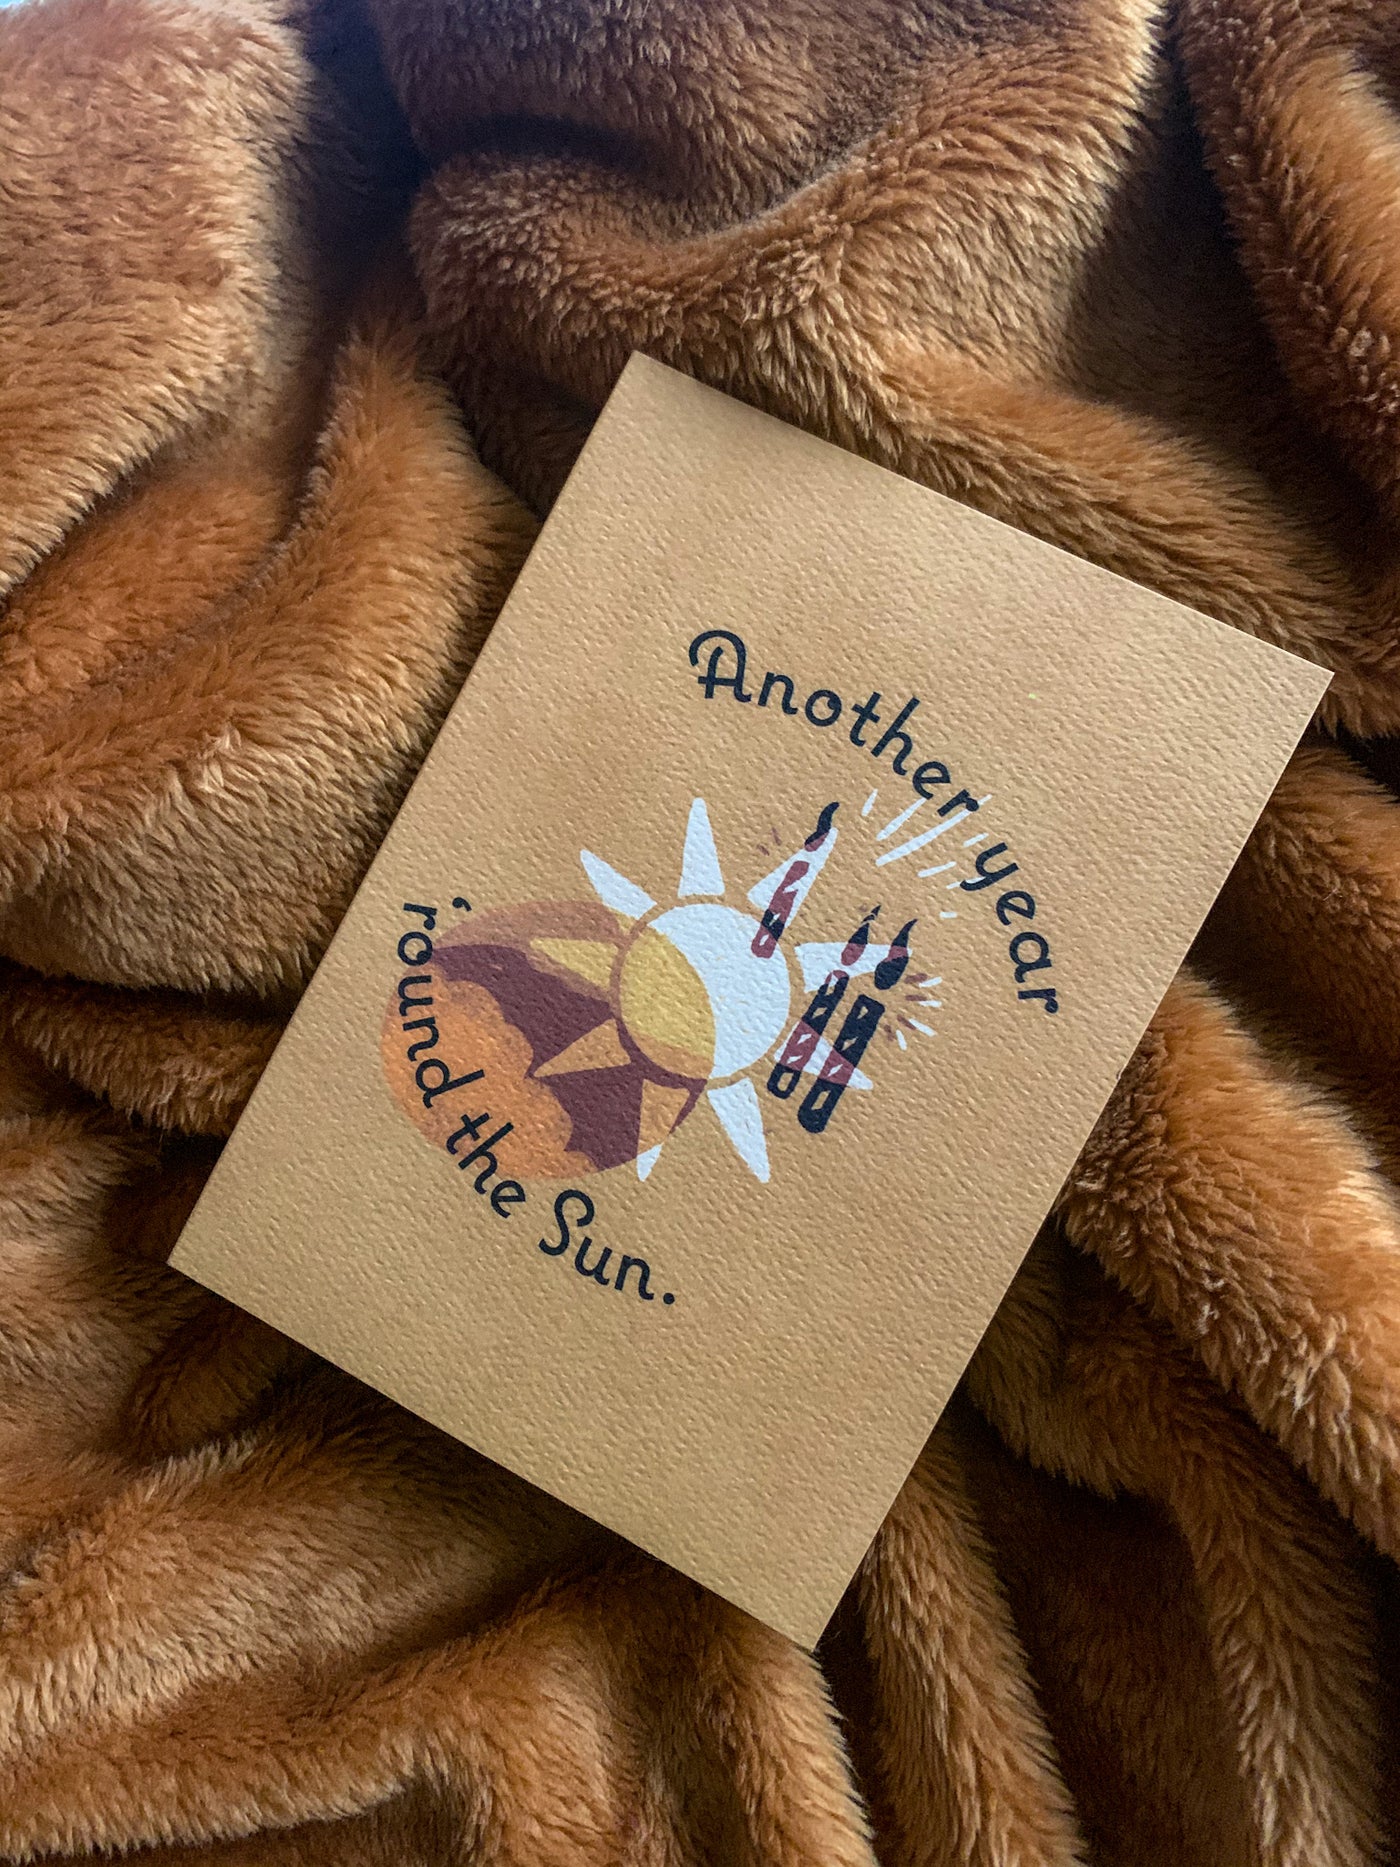 tan colored card that reads "another year around the sun." with sun illustration